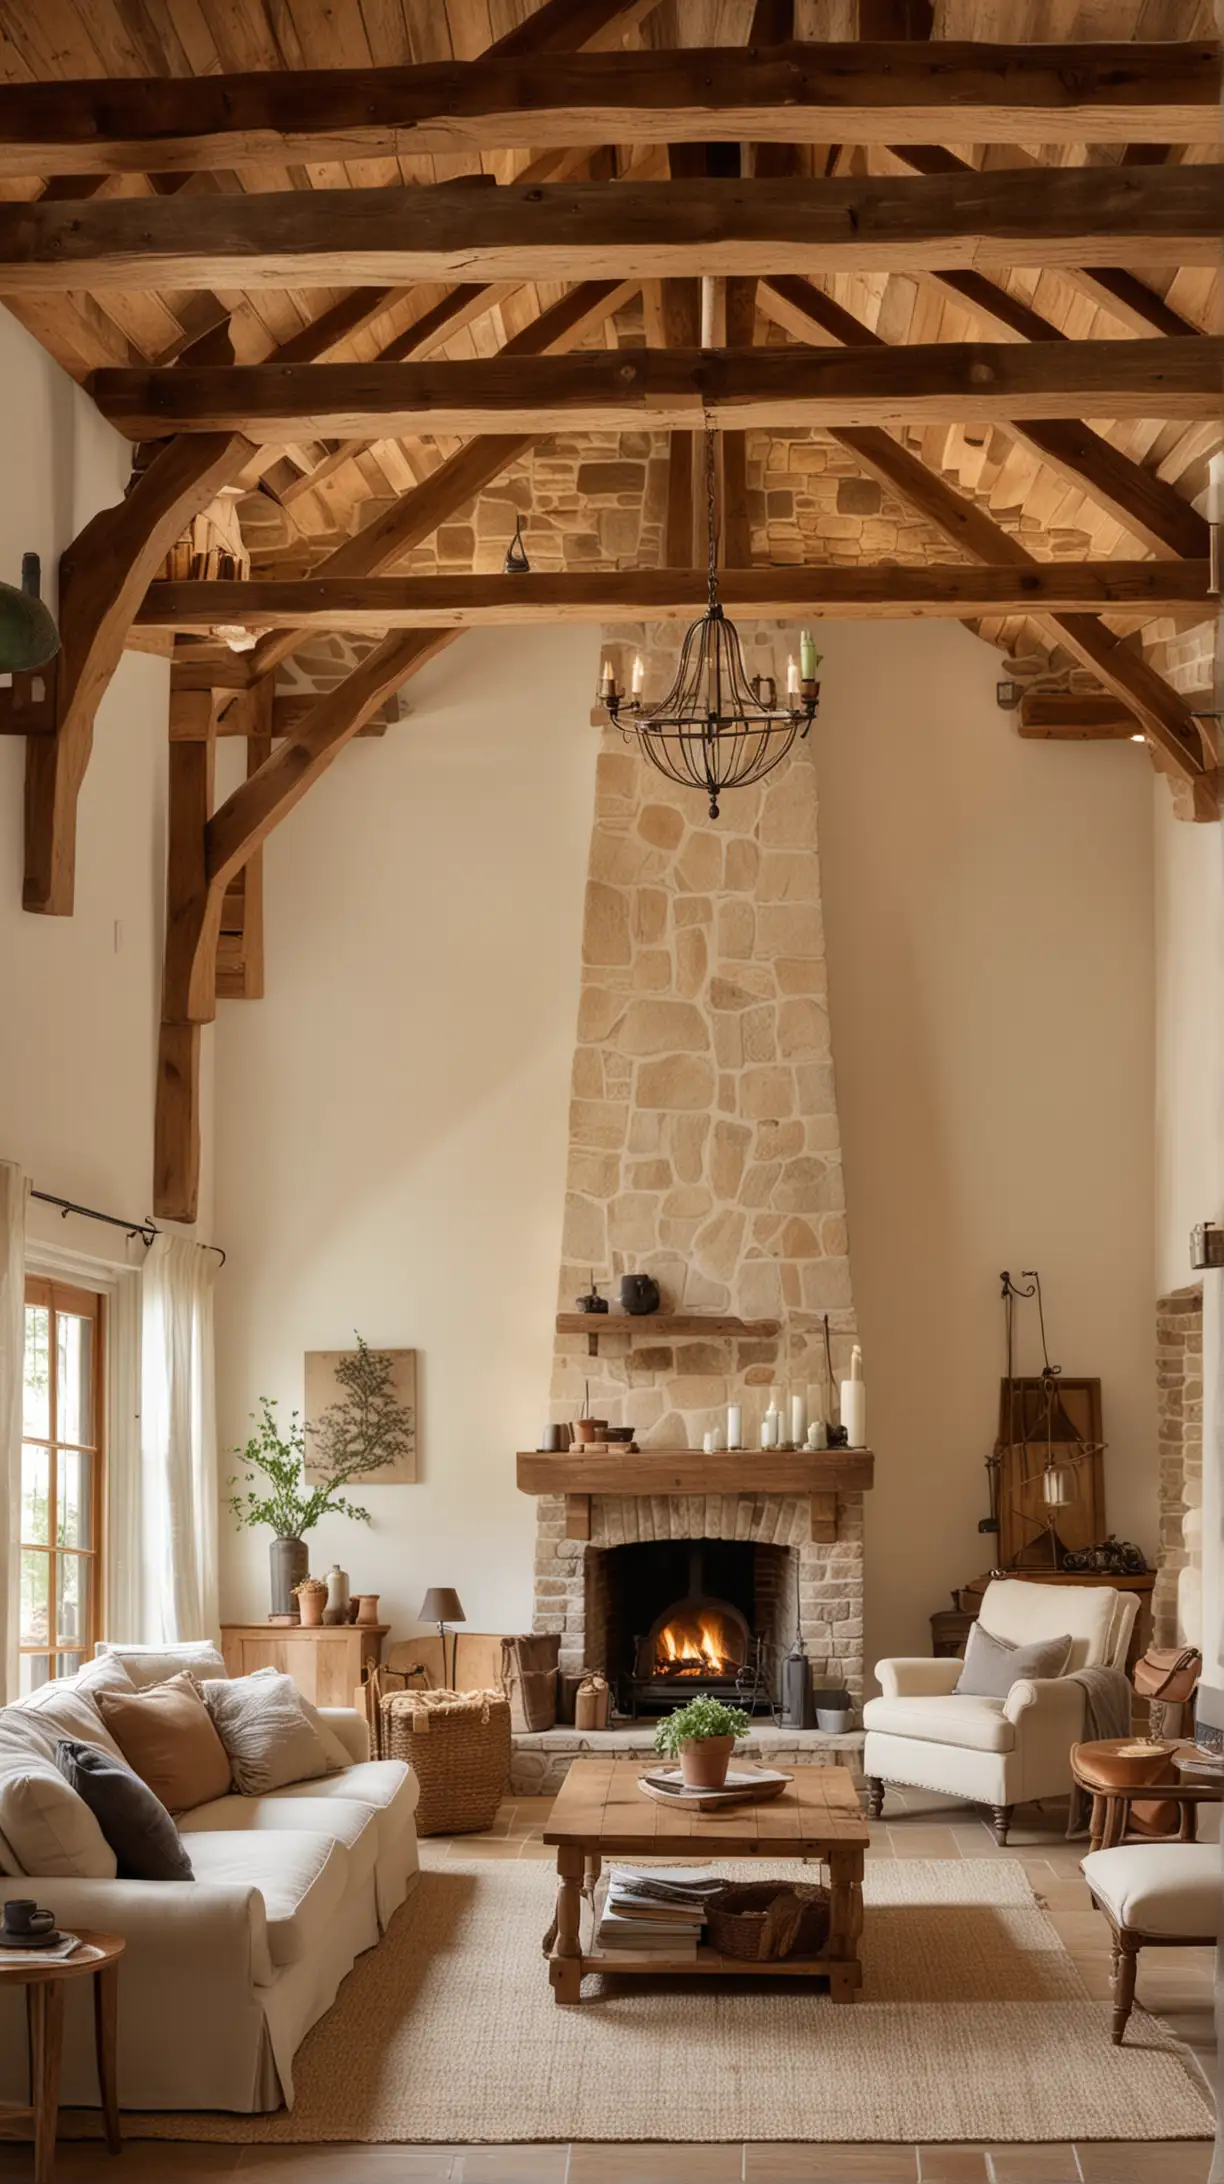 A cozy country living room with exposed wooden beams on the ceiling, featuring soft, warm lighting and comfortable seating arrangements. The decor includes earth tones and natural textures.